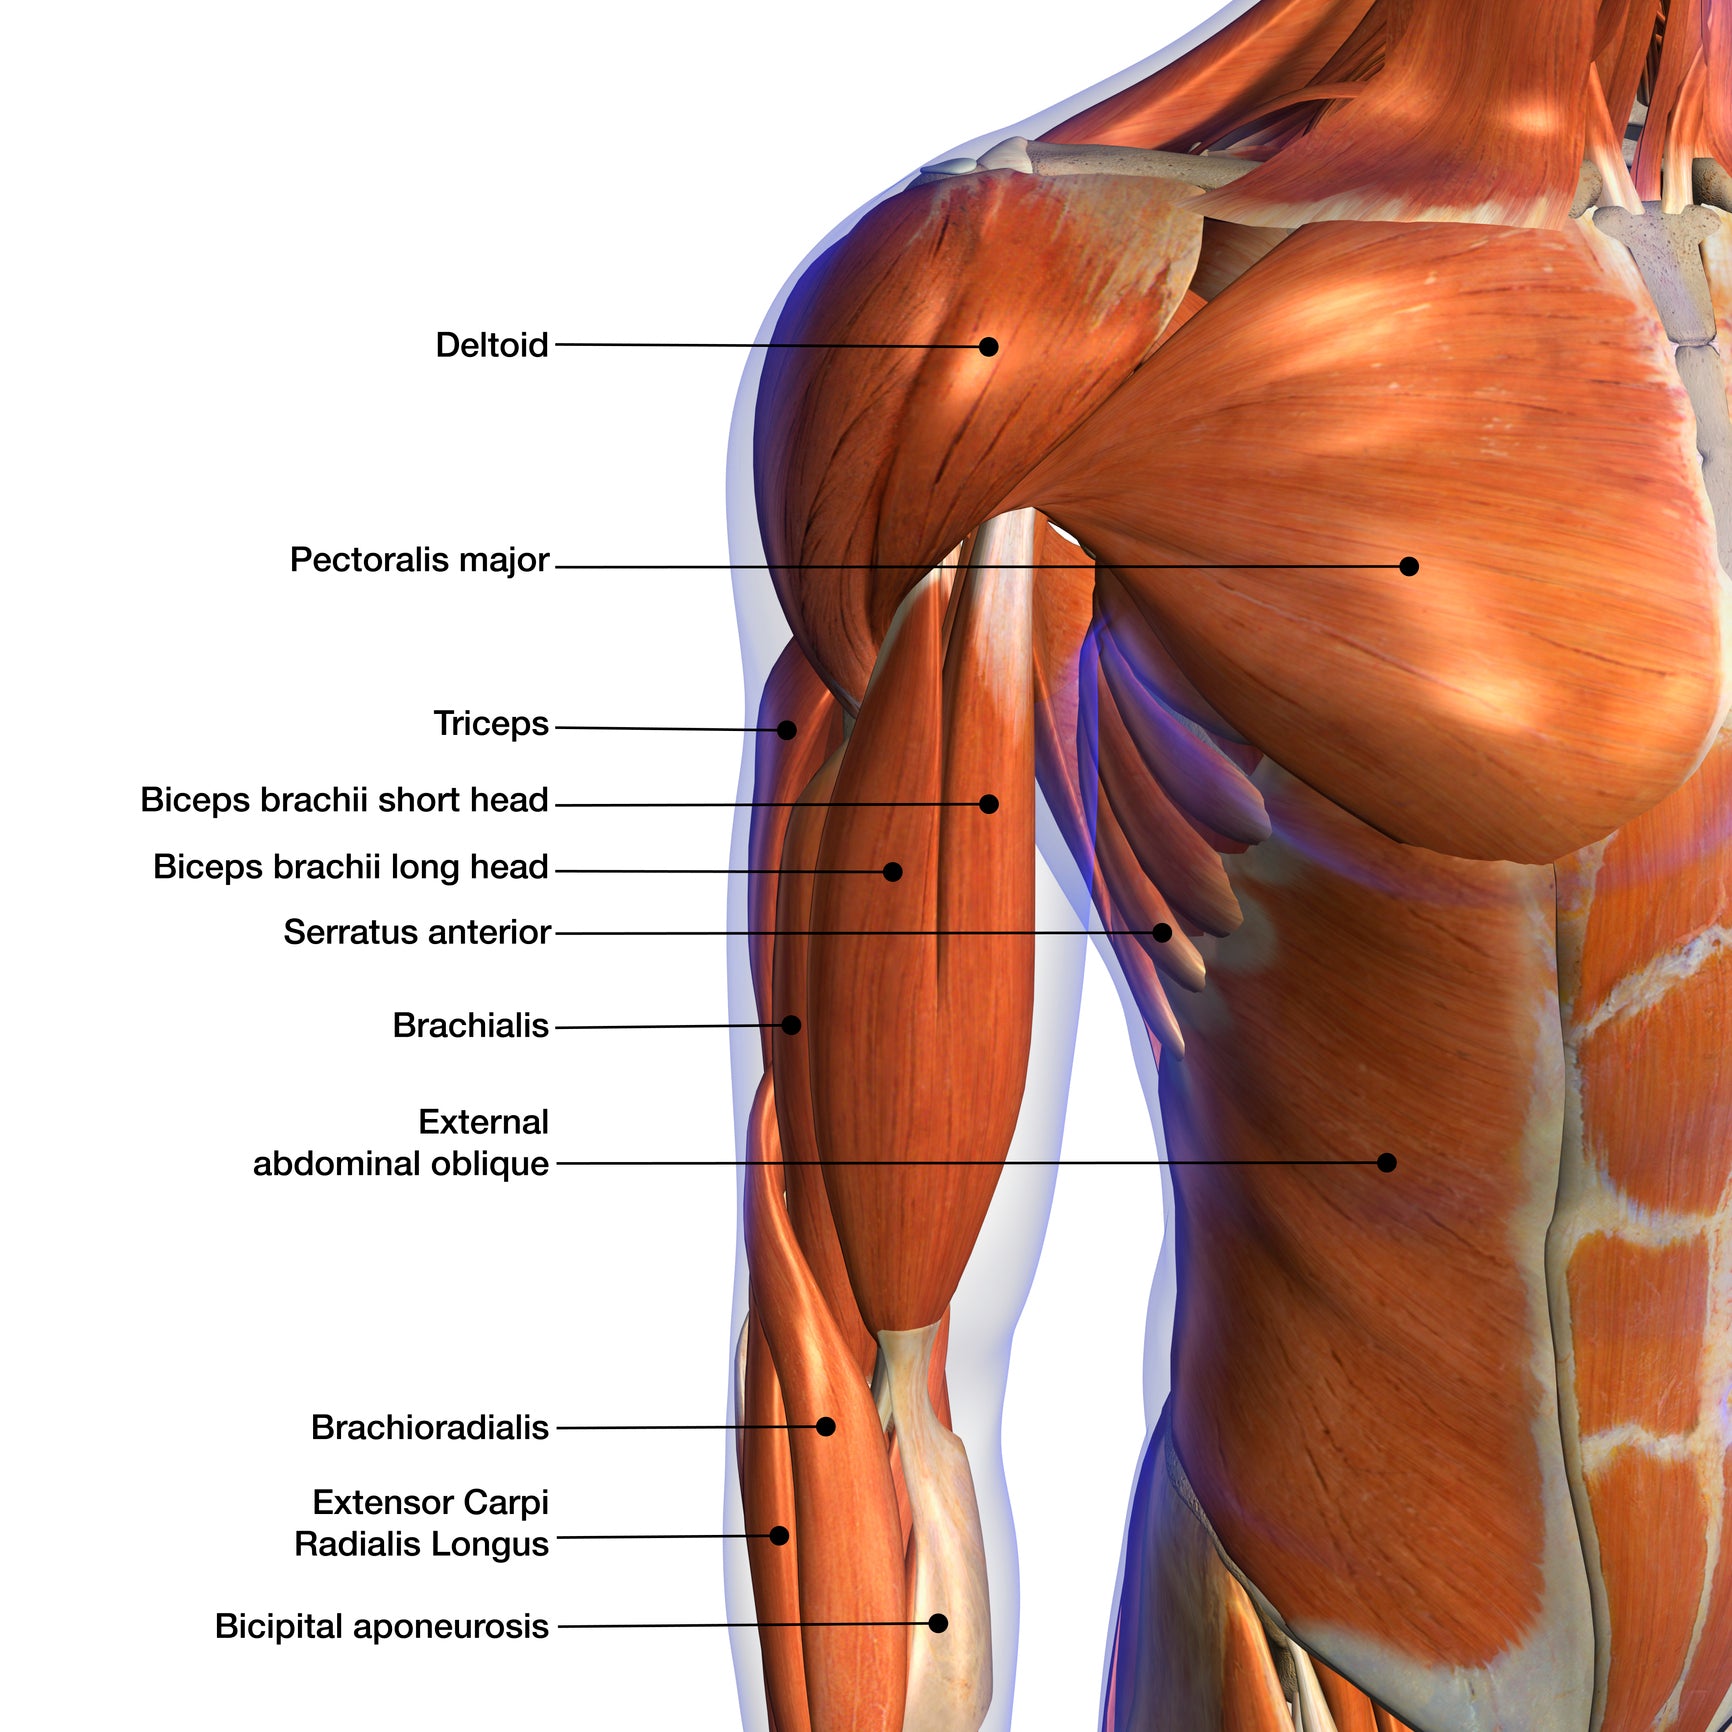 Treating the Triceps, Triceps and more